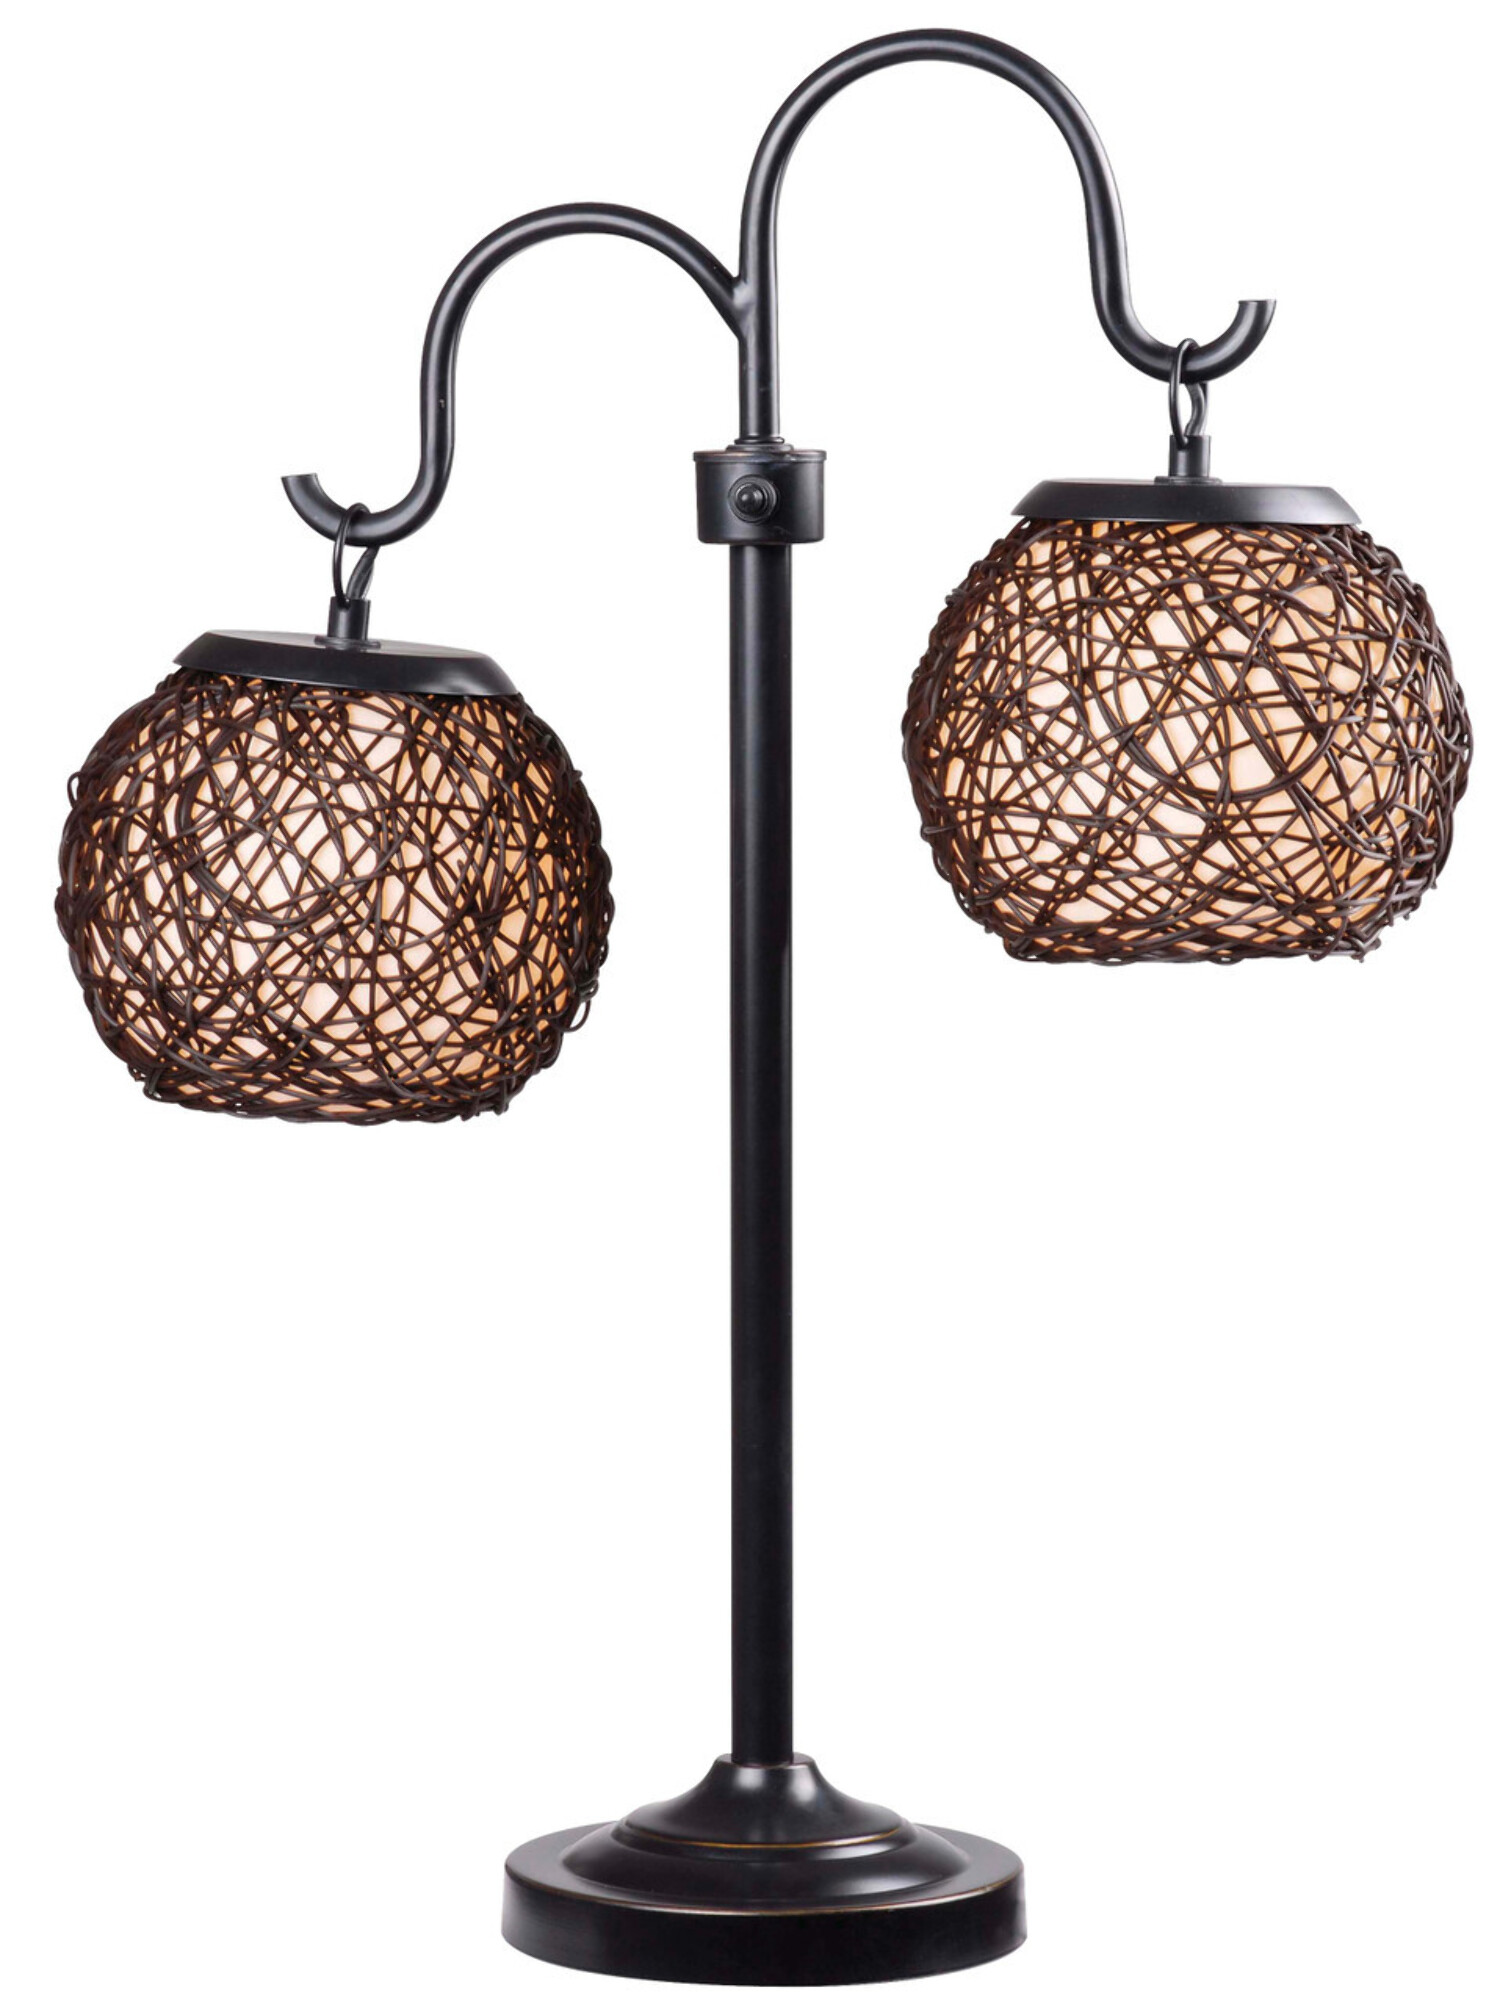 Kenroy Home Mediterranean-Inspired Outdoor Table Lamp, 29 Inch Height, Oil Rubbed Bronze Finish, Cream Acrylic Inner Shade with Rattan Entwined Outer Shades, 4 Way Adjustable Lighting, Pole Switch - image 2 of 8